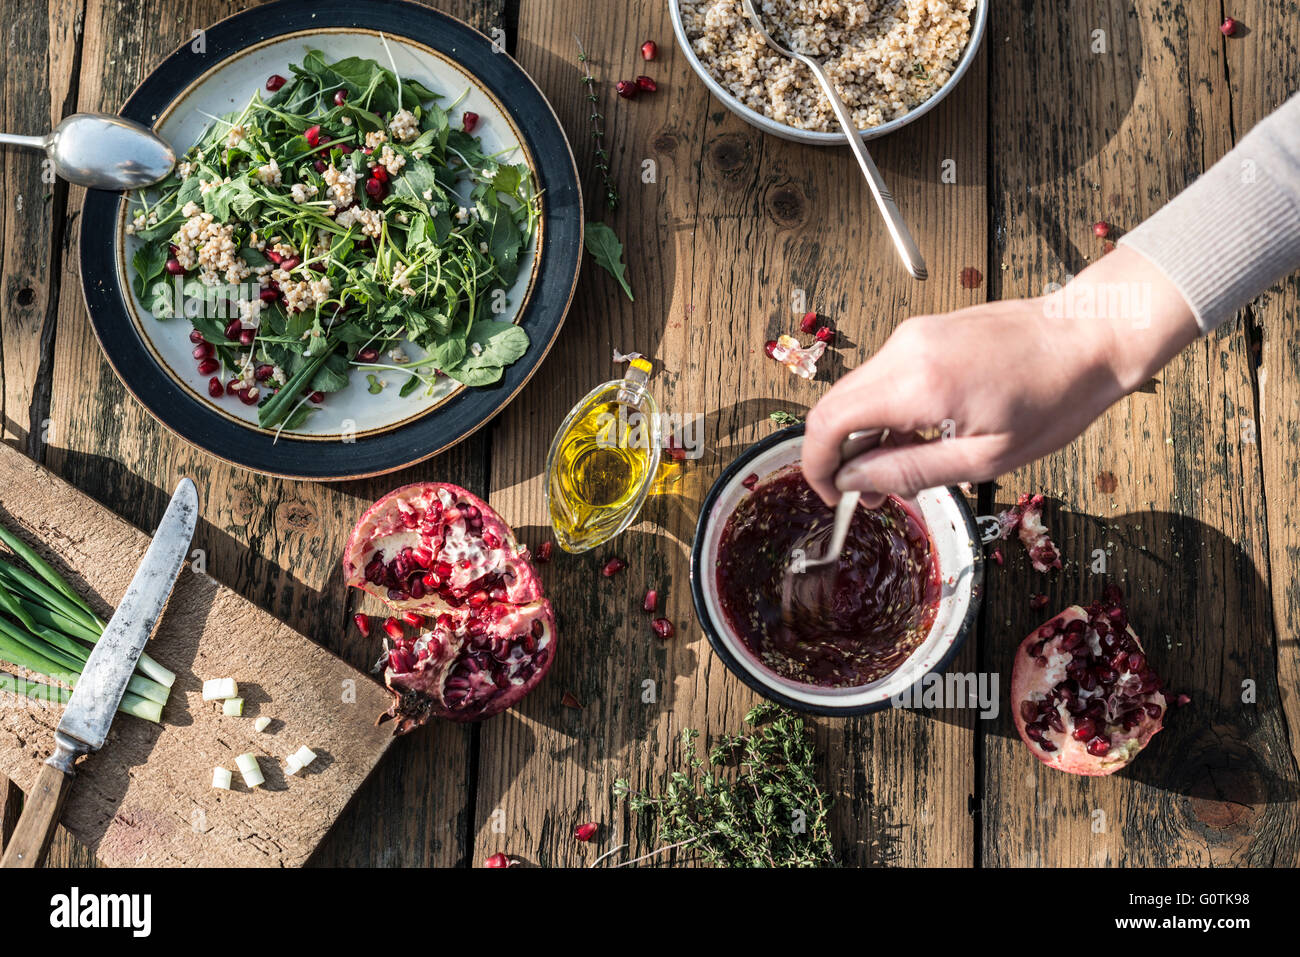 Green salad with pomegranate, manna croup and onion Stock Photo